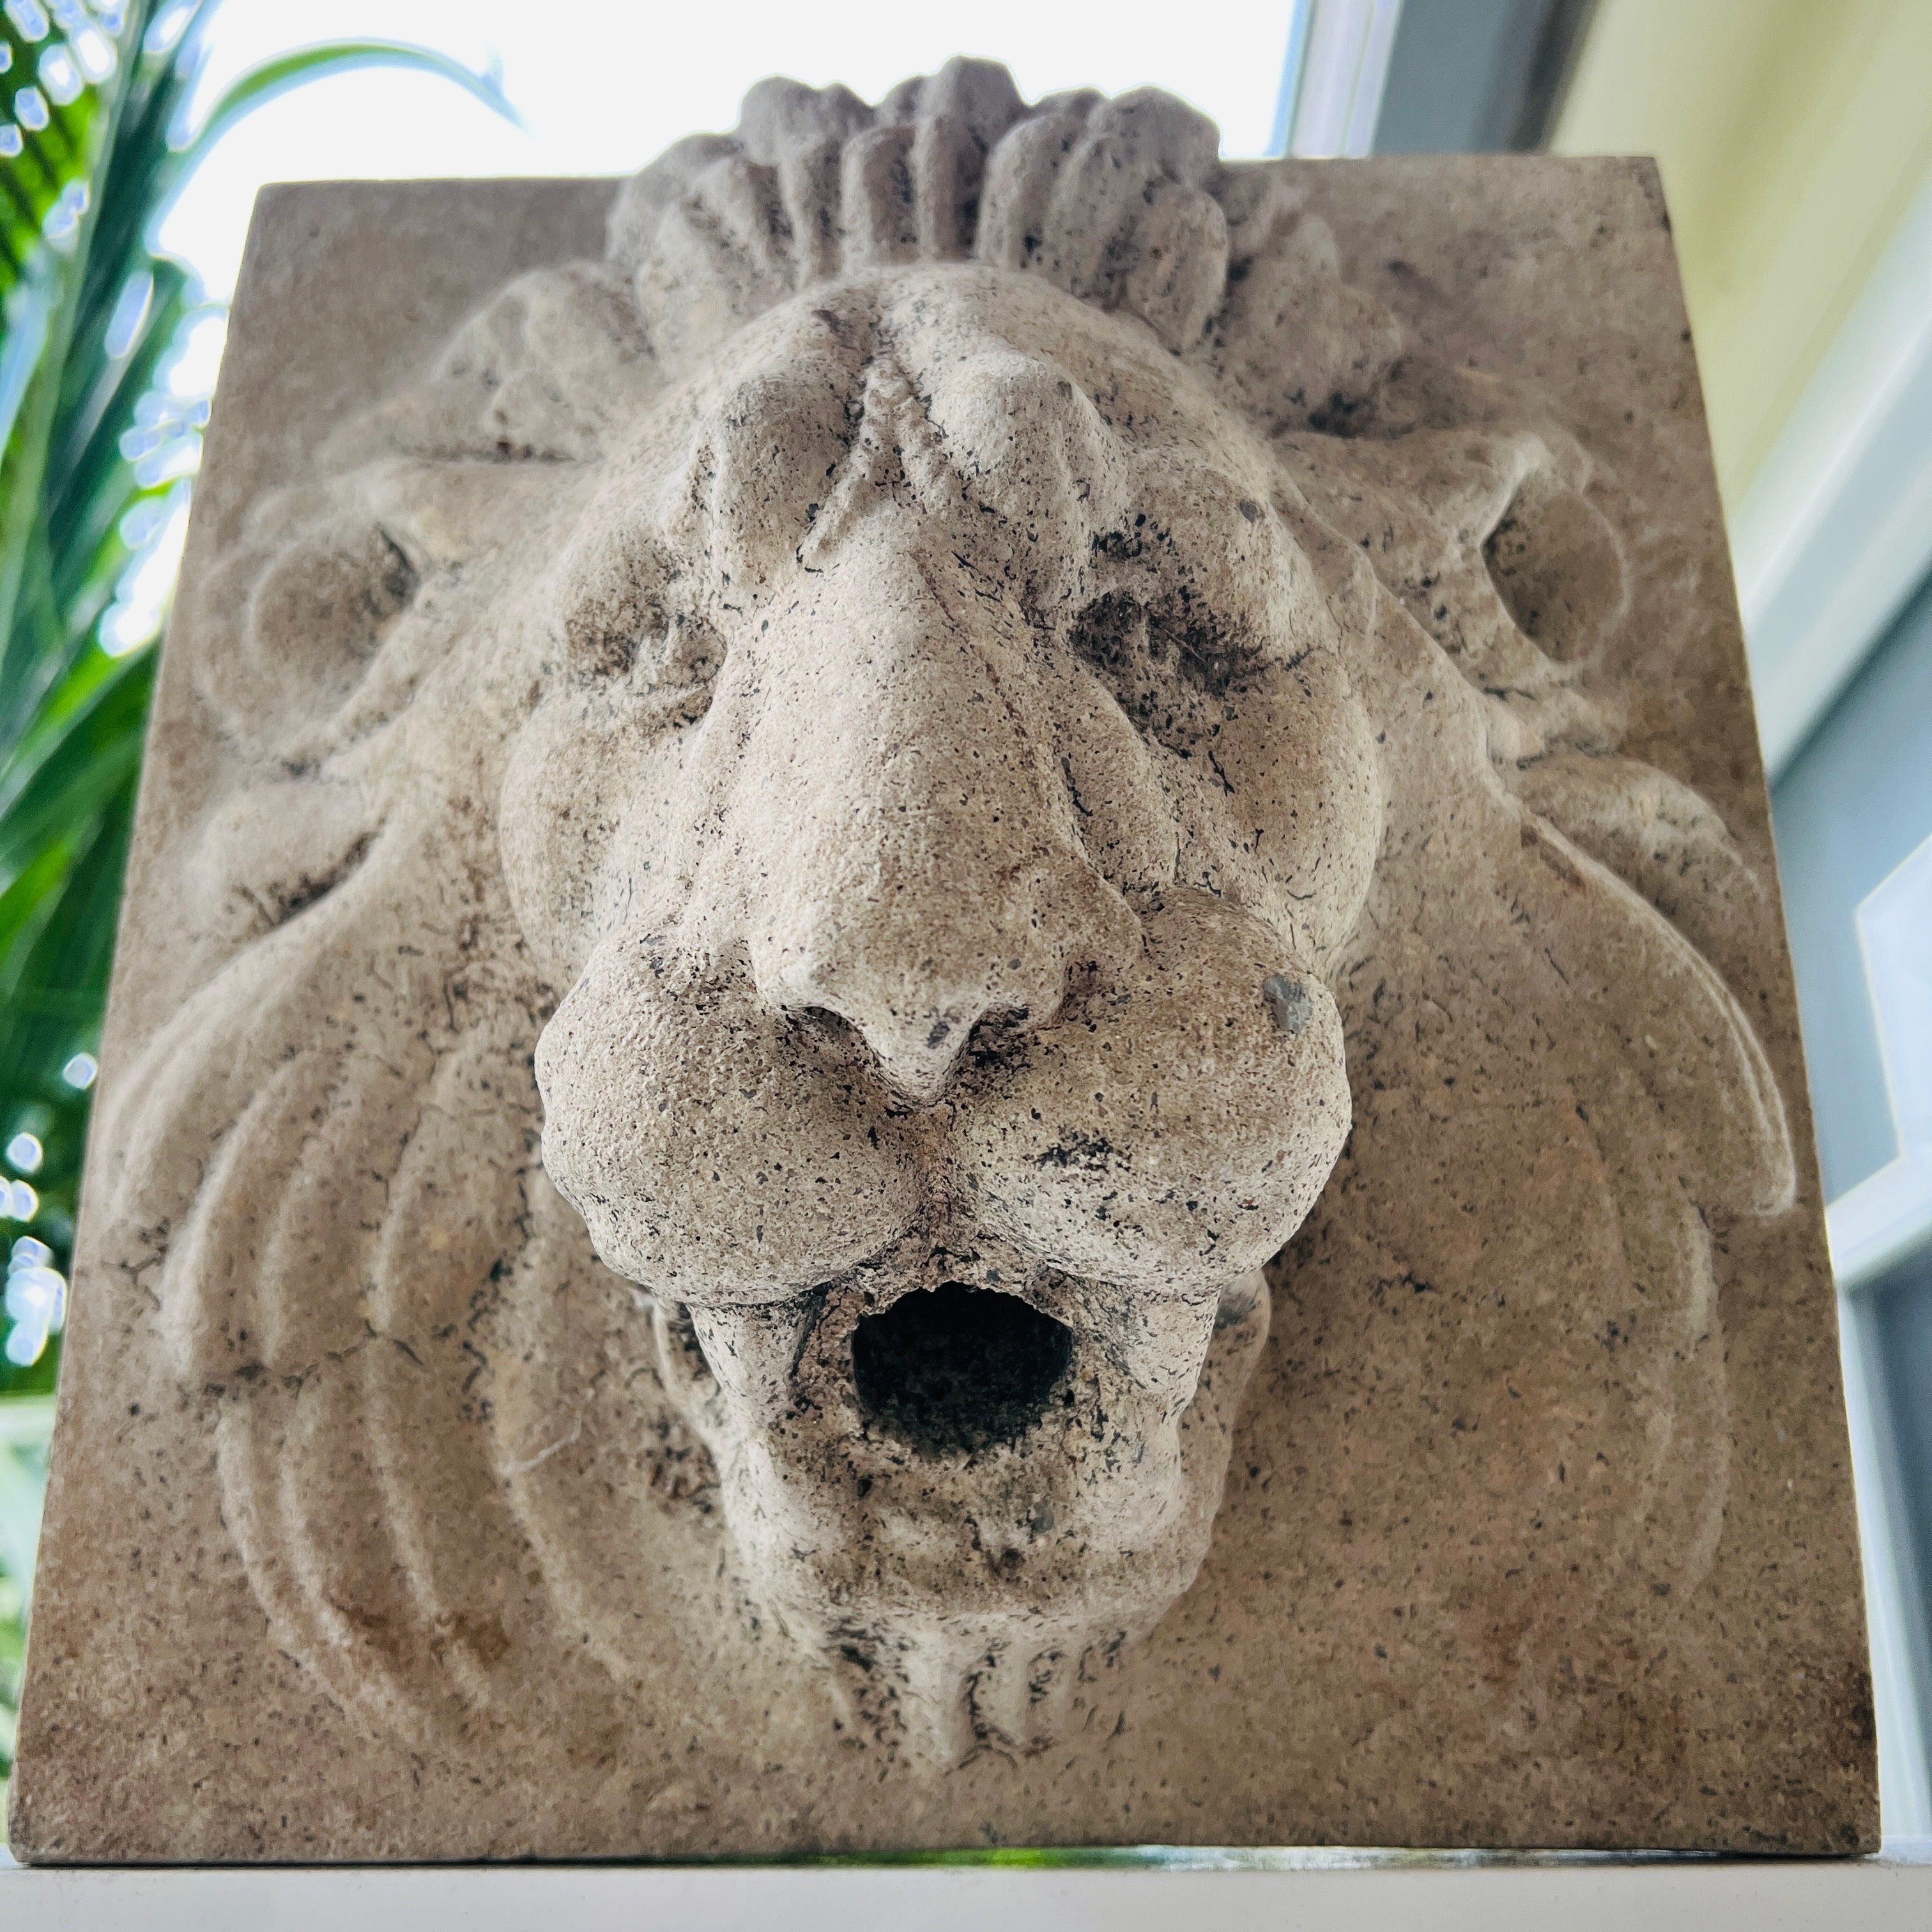 Lion head wall fountain made of cast stone in the style of Beaux Arts movement, incorporating elements of Renaissance, Baroque, and French Neoclassicism. Can we hung on a wall or used as an architectural element. Reverse side is fitted with steal